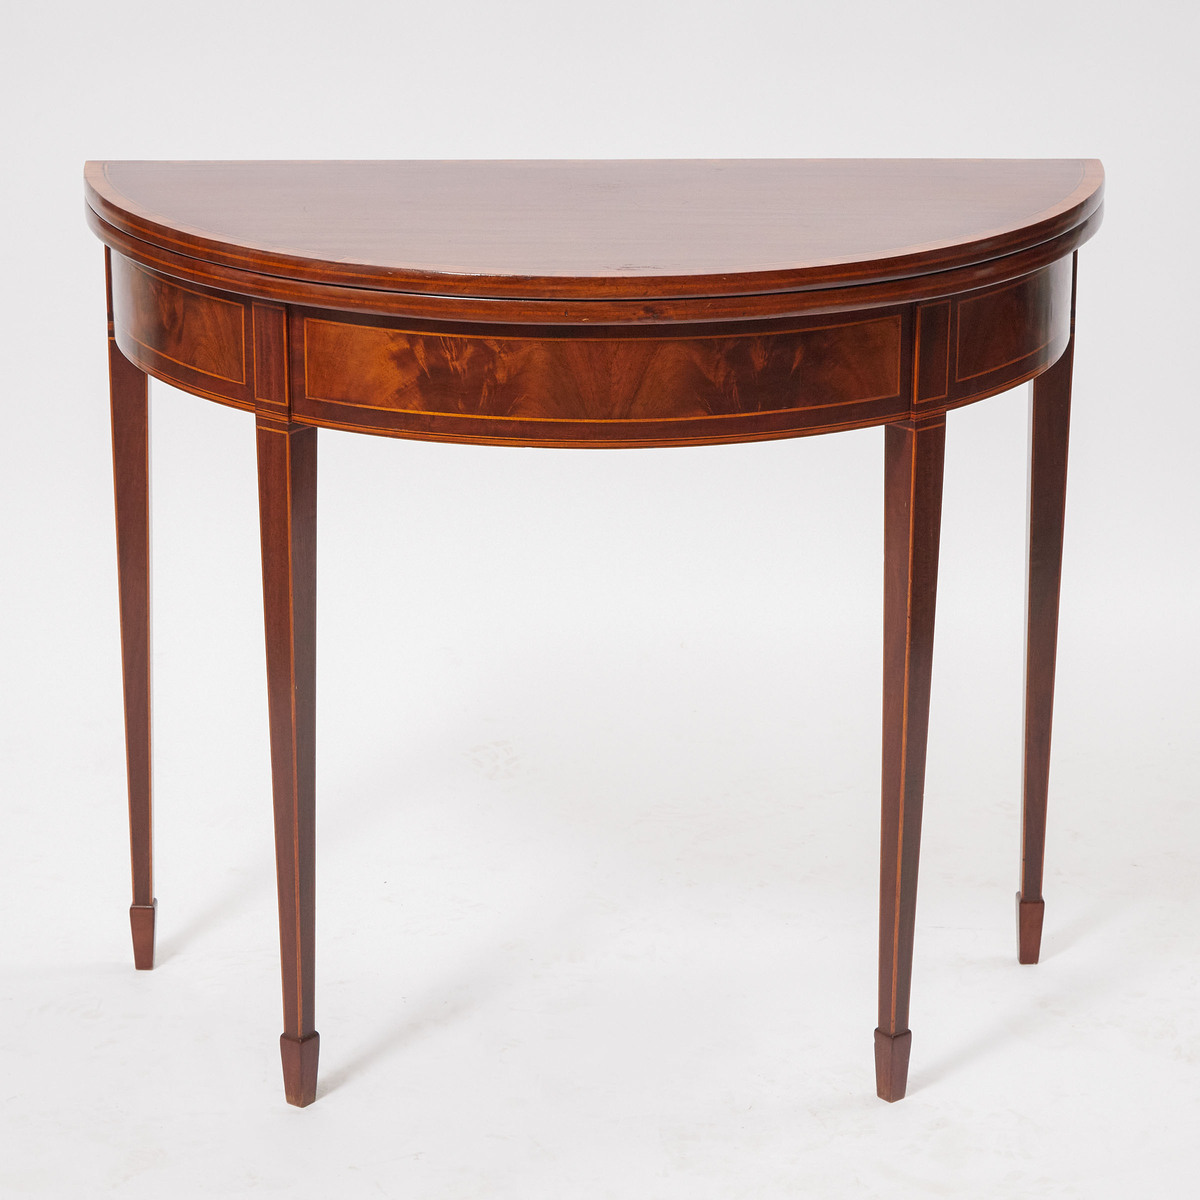 George III Style Satinwood Strung Flame Mahogany Demi-Lune Folding Card Table, 20th century, 30.5 x